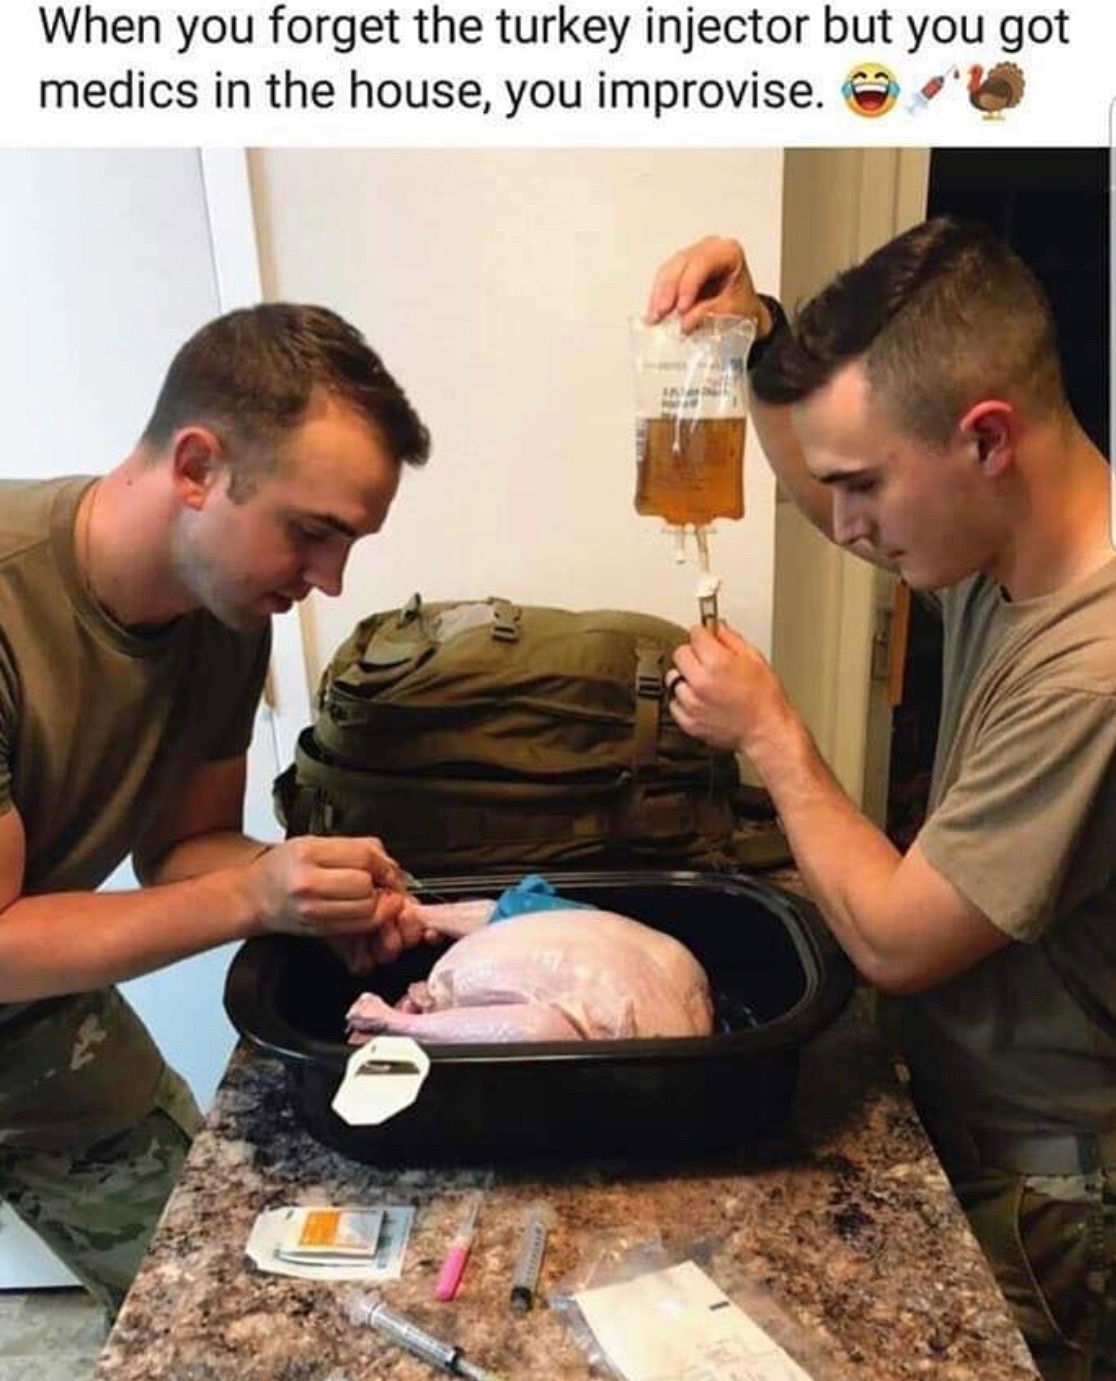 photo caption - When you forget the turkey injector but you got medics in the house, you improvise. .